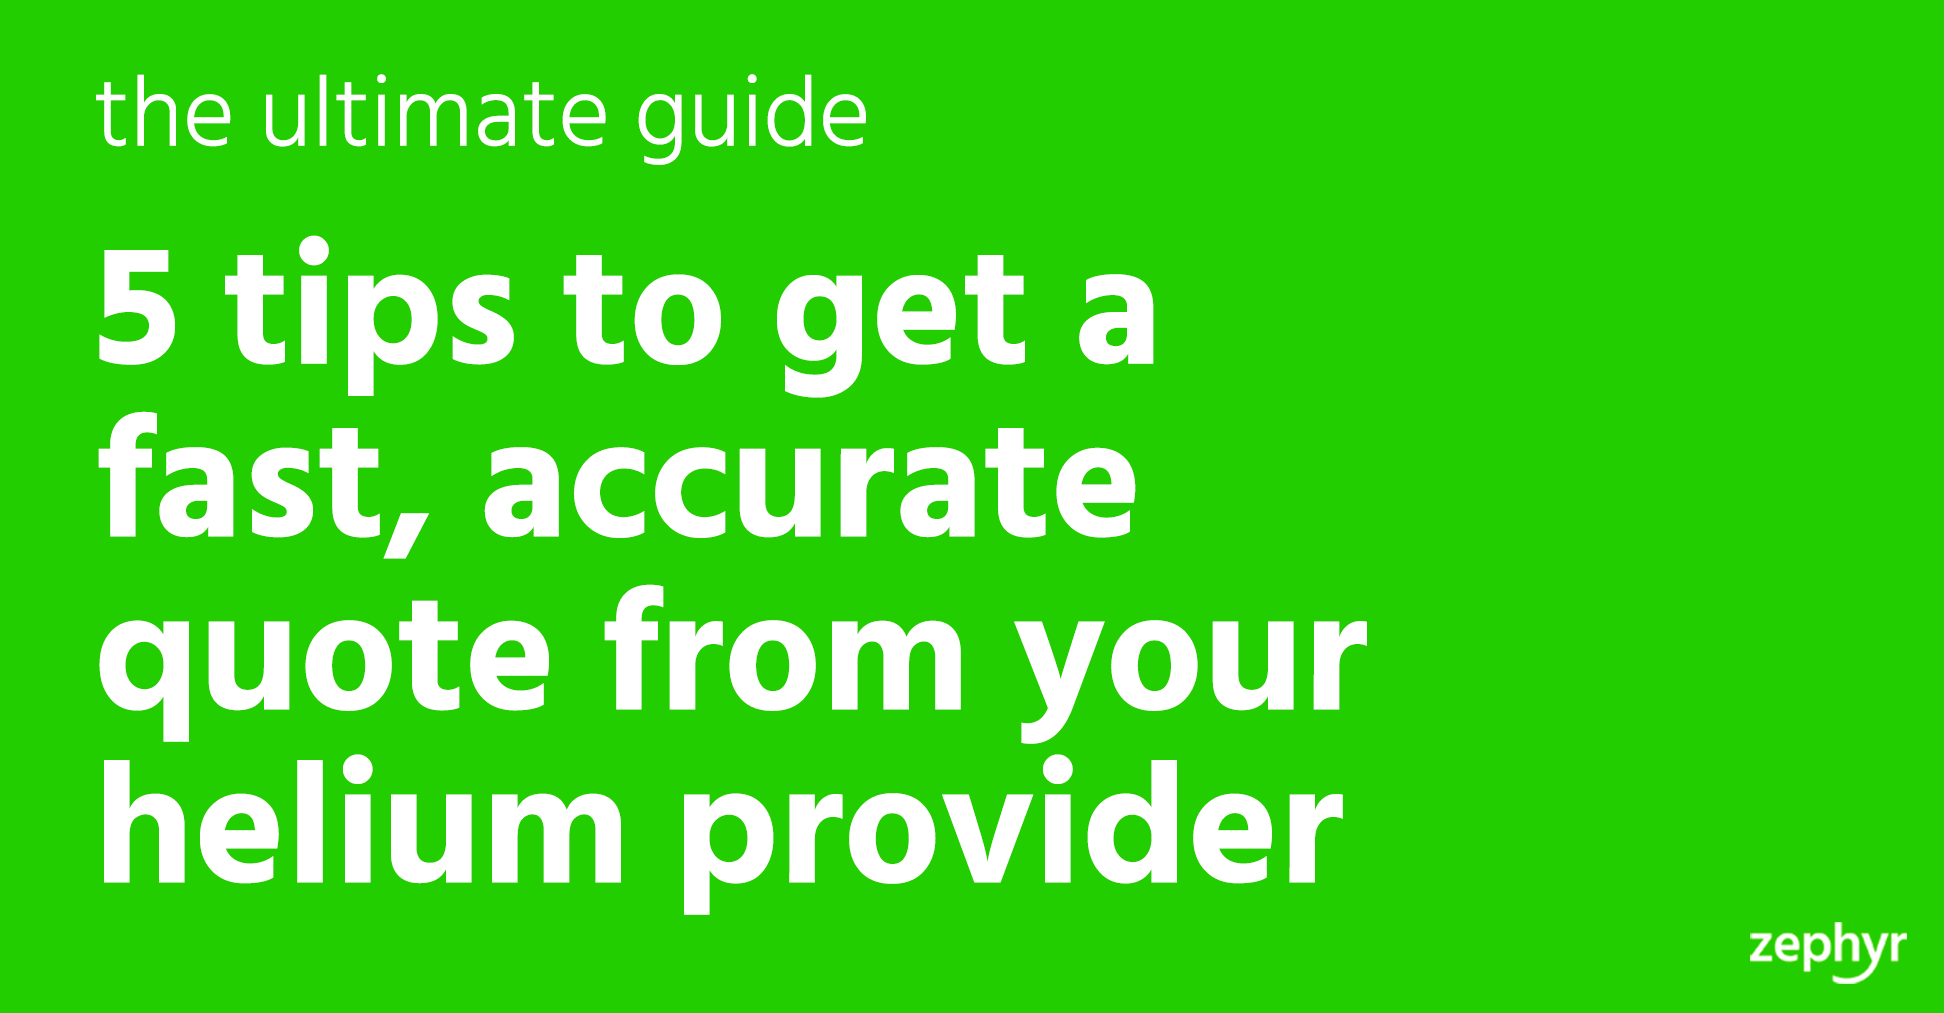 5 tips to get a fast, accurate quote from your helium provider